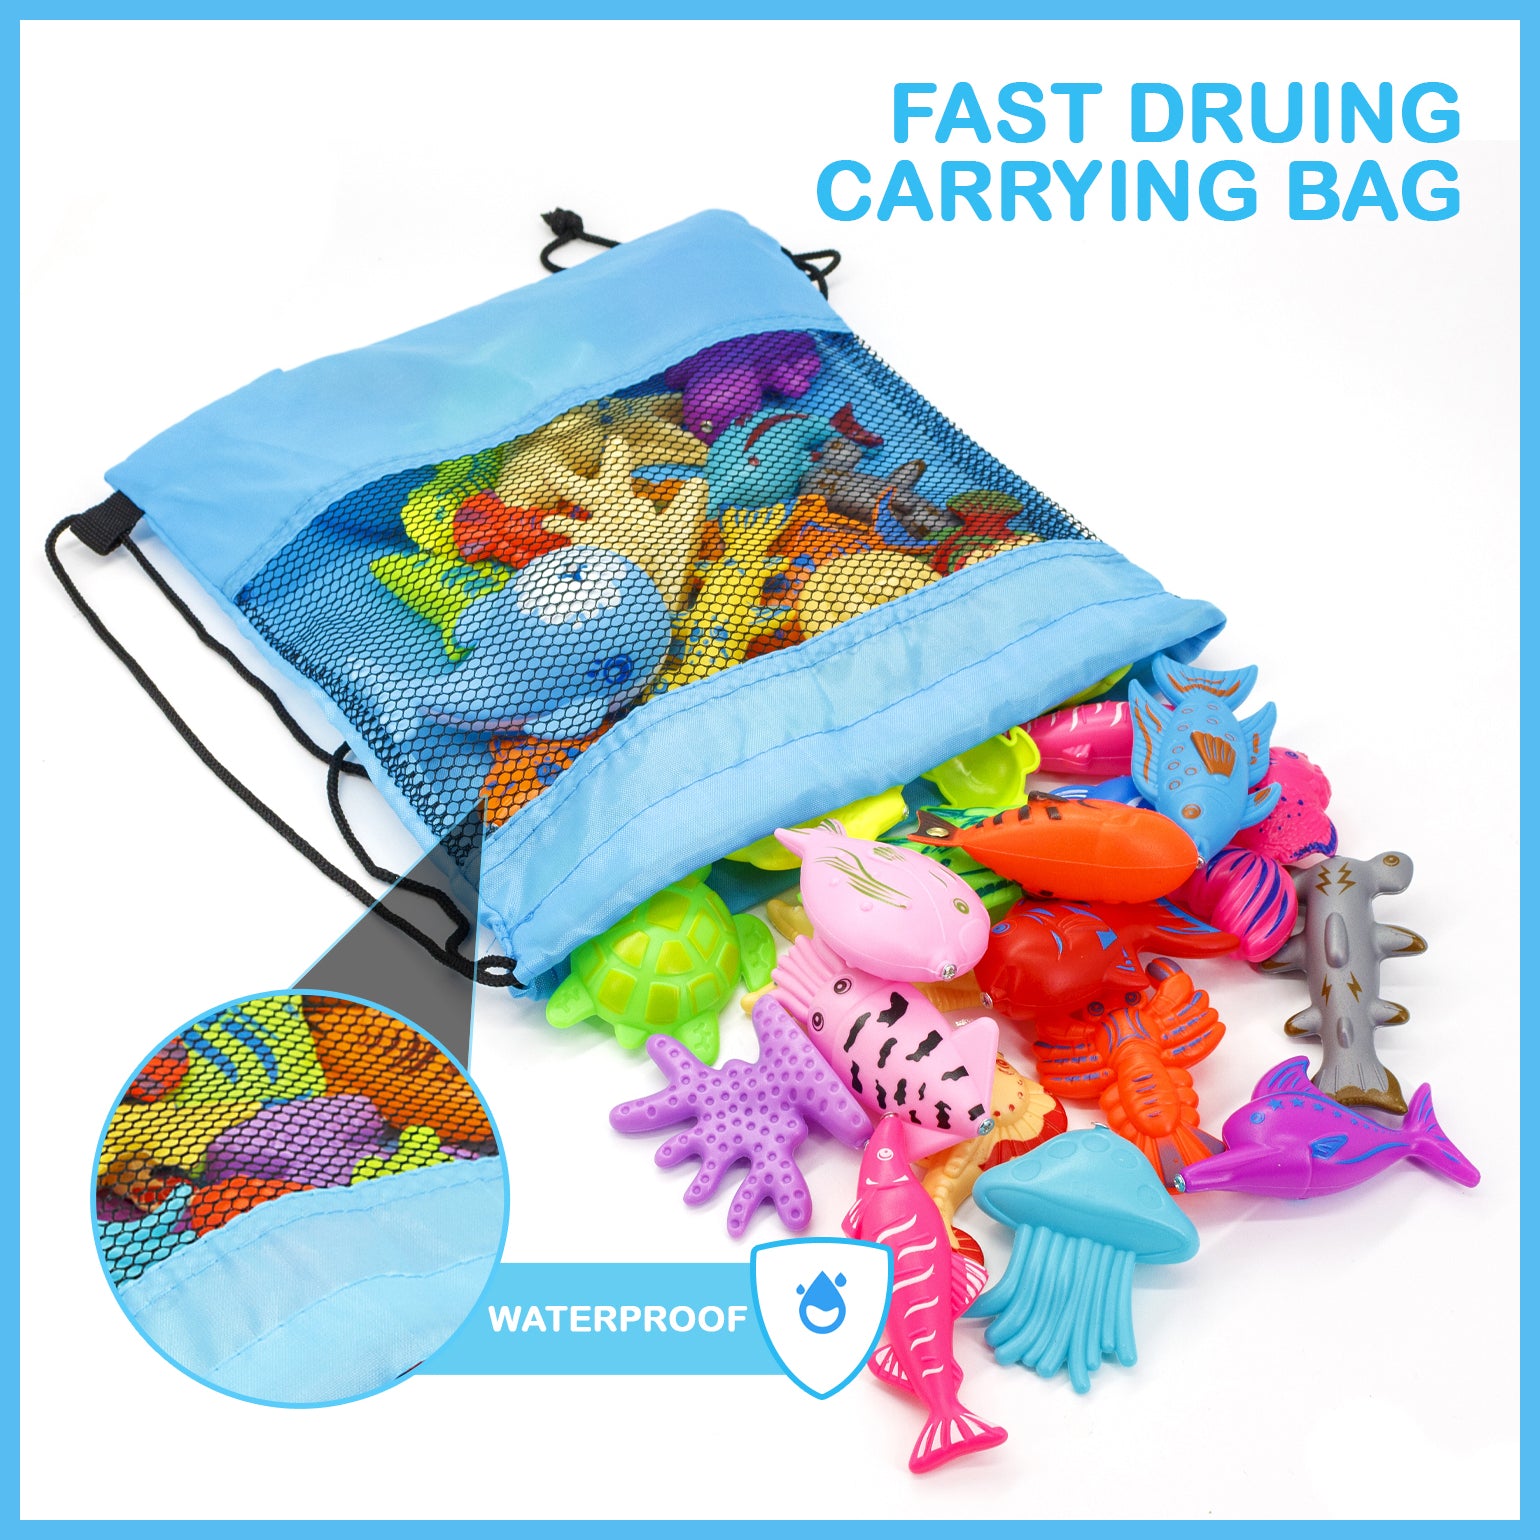 Magnetic Fishing Toys Game Set for Kids by CozyBomB for Bath Time